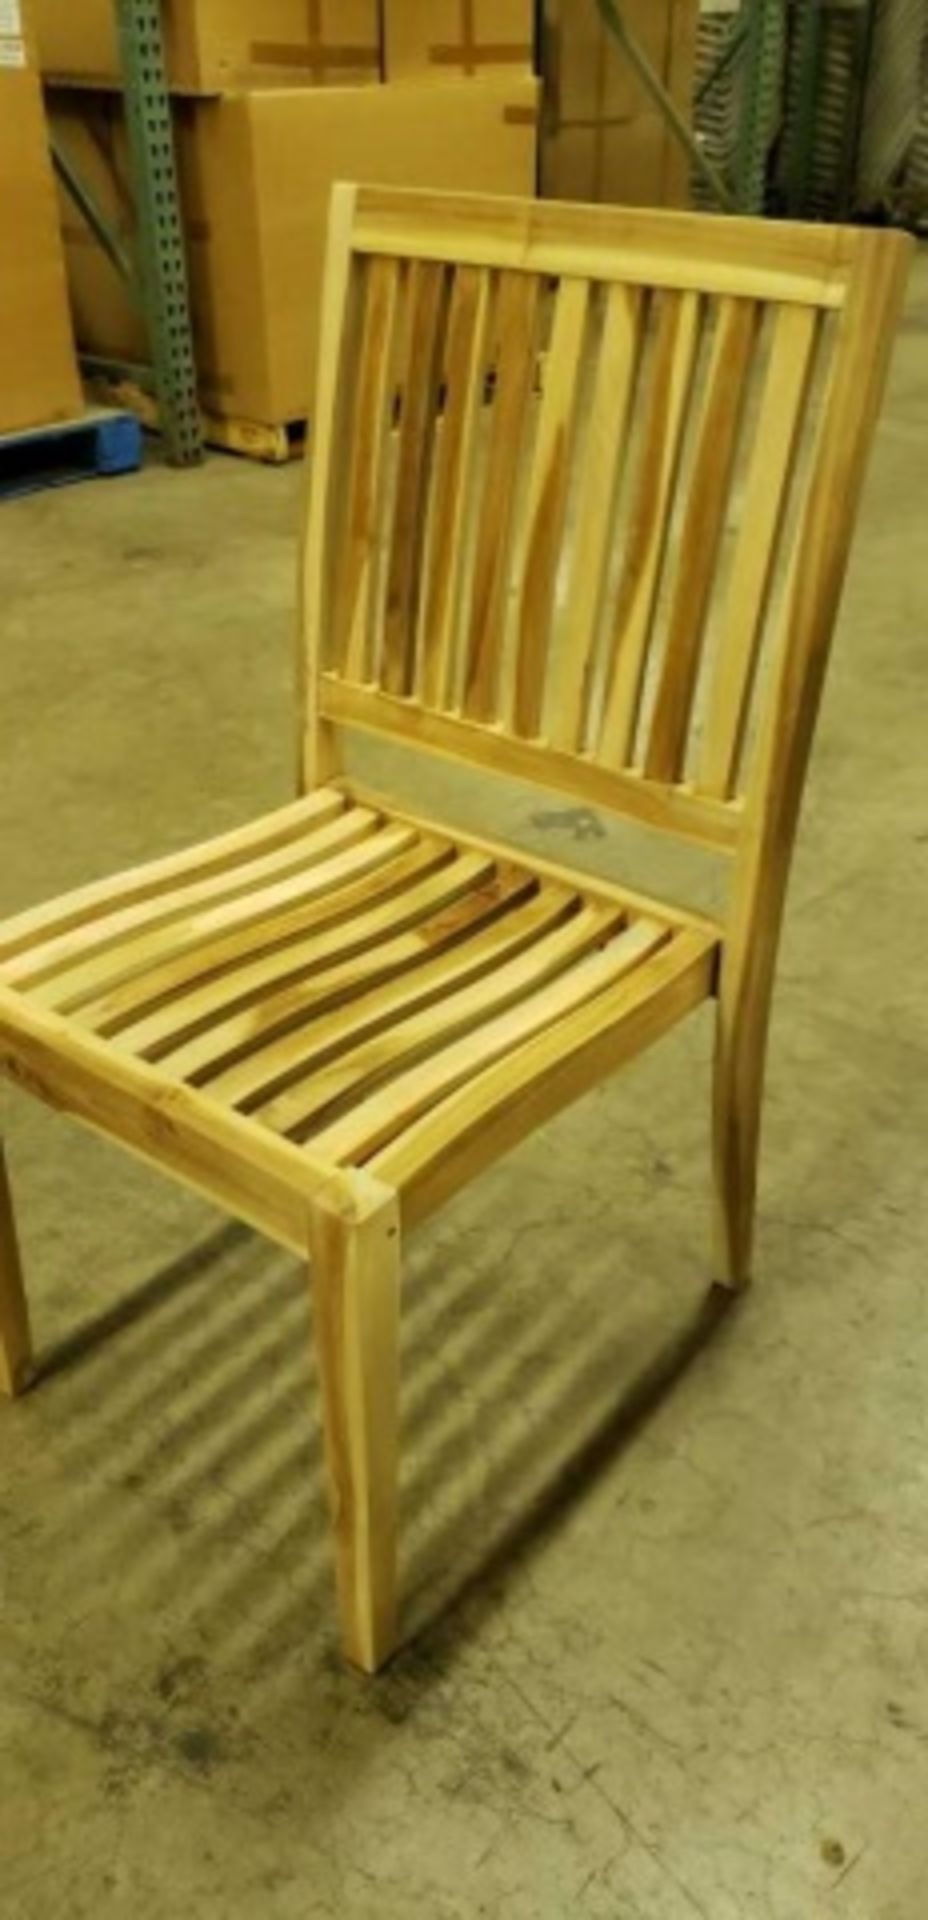 Genuine Teak Wood Reno Side Chair - Natural Wood. KT-RS. Dimensions:19.7"w x 21.6"d x 35.8"h, 17.3" - Image 4 of 6